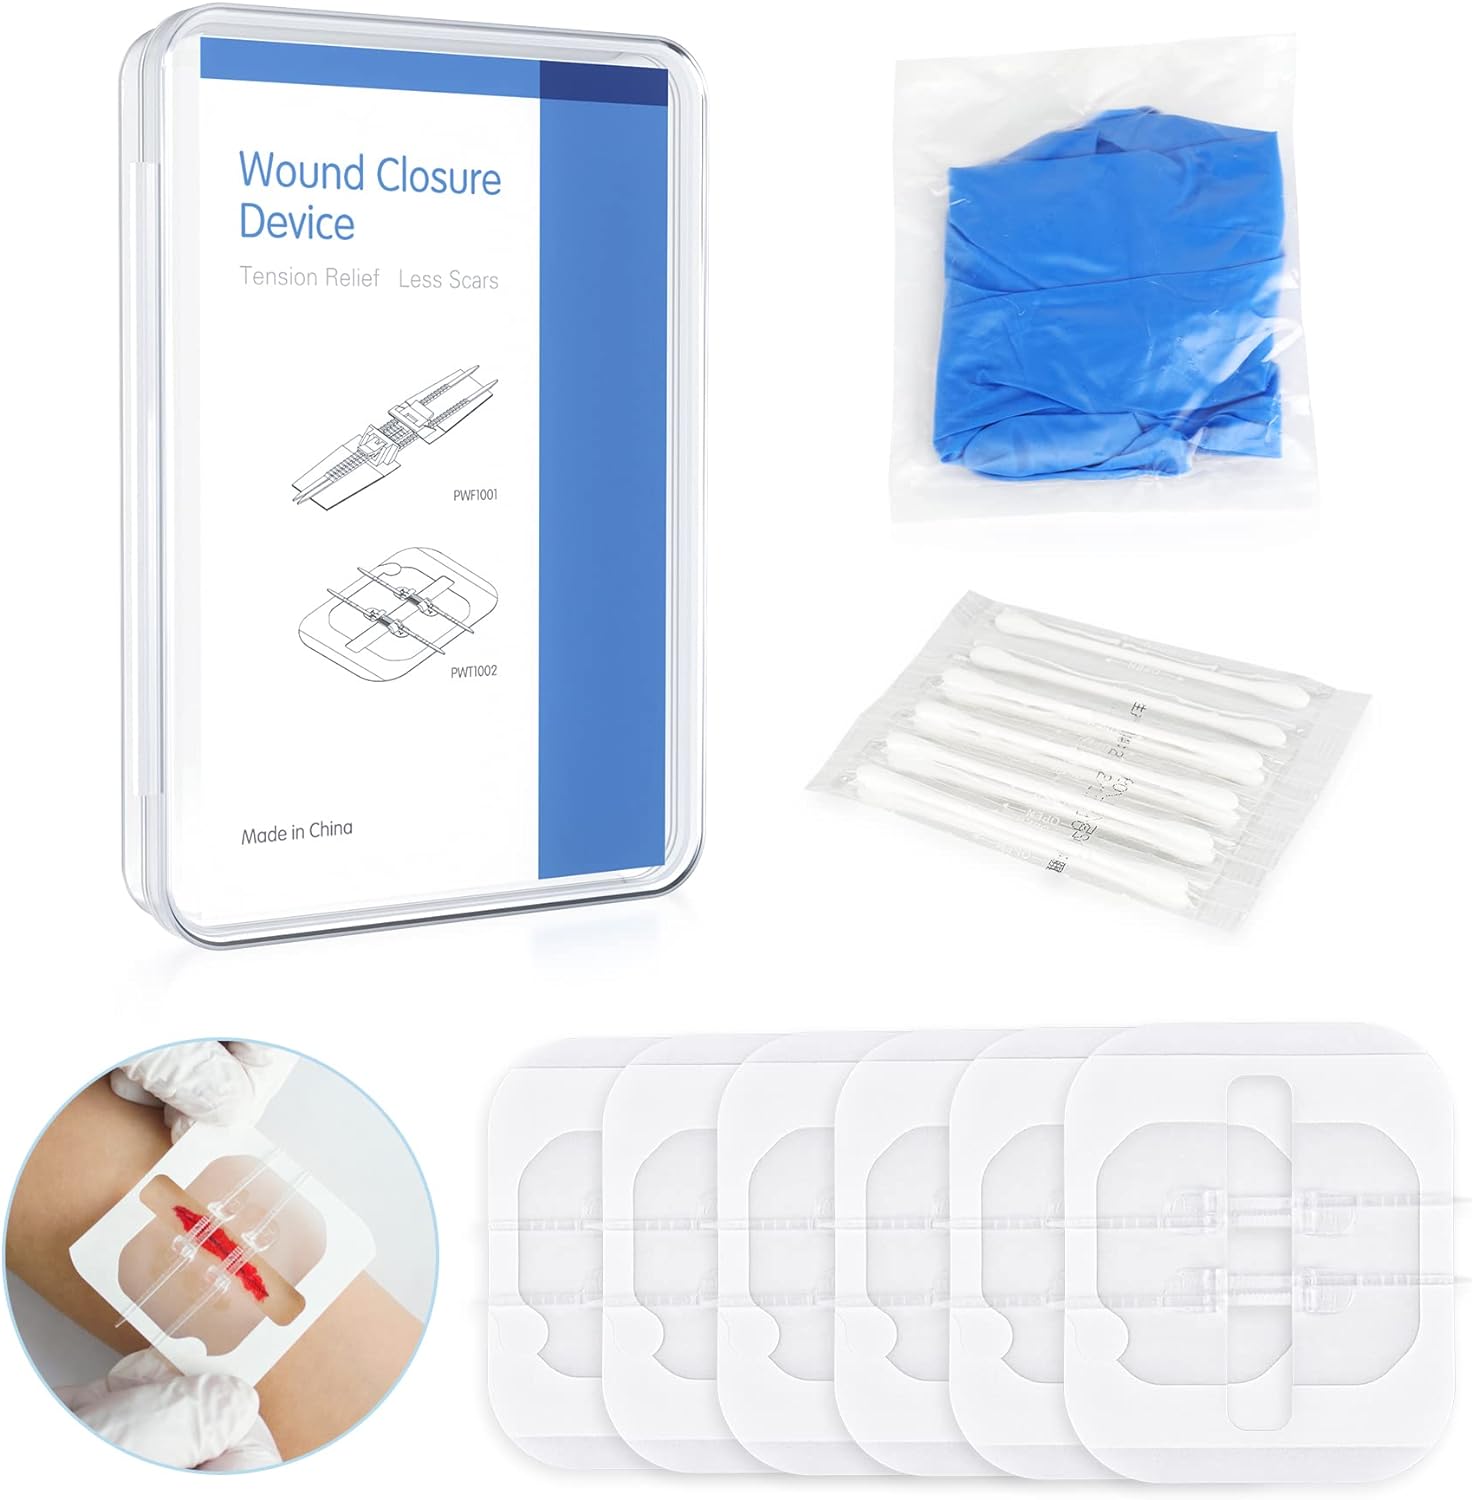 Pack of 6 Wound Closures Strips, Sterile First Aid Kits, Emergency Wound Closures, Plaster Adhesive Bandages, First Aid & Safety for Camping & Outdoor Use